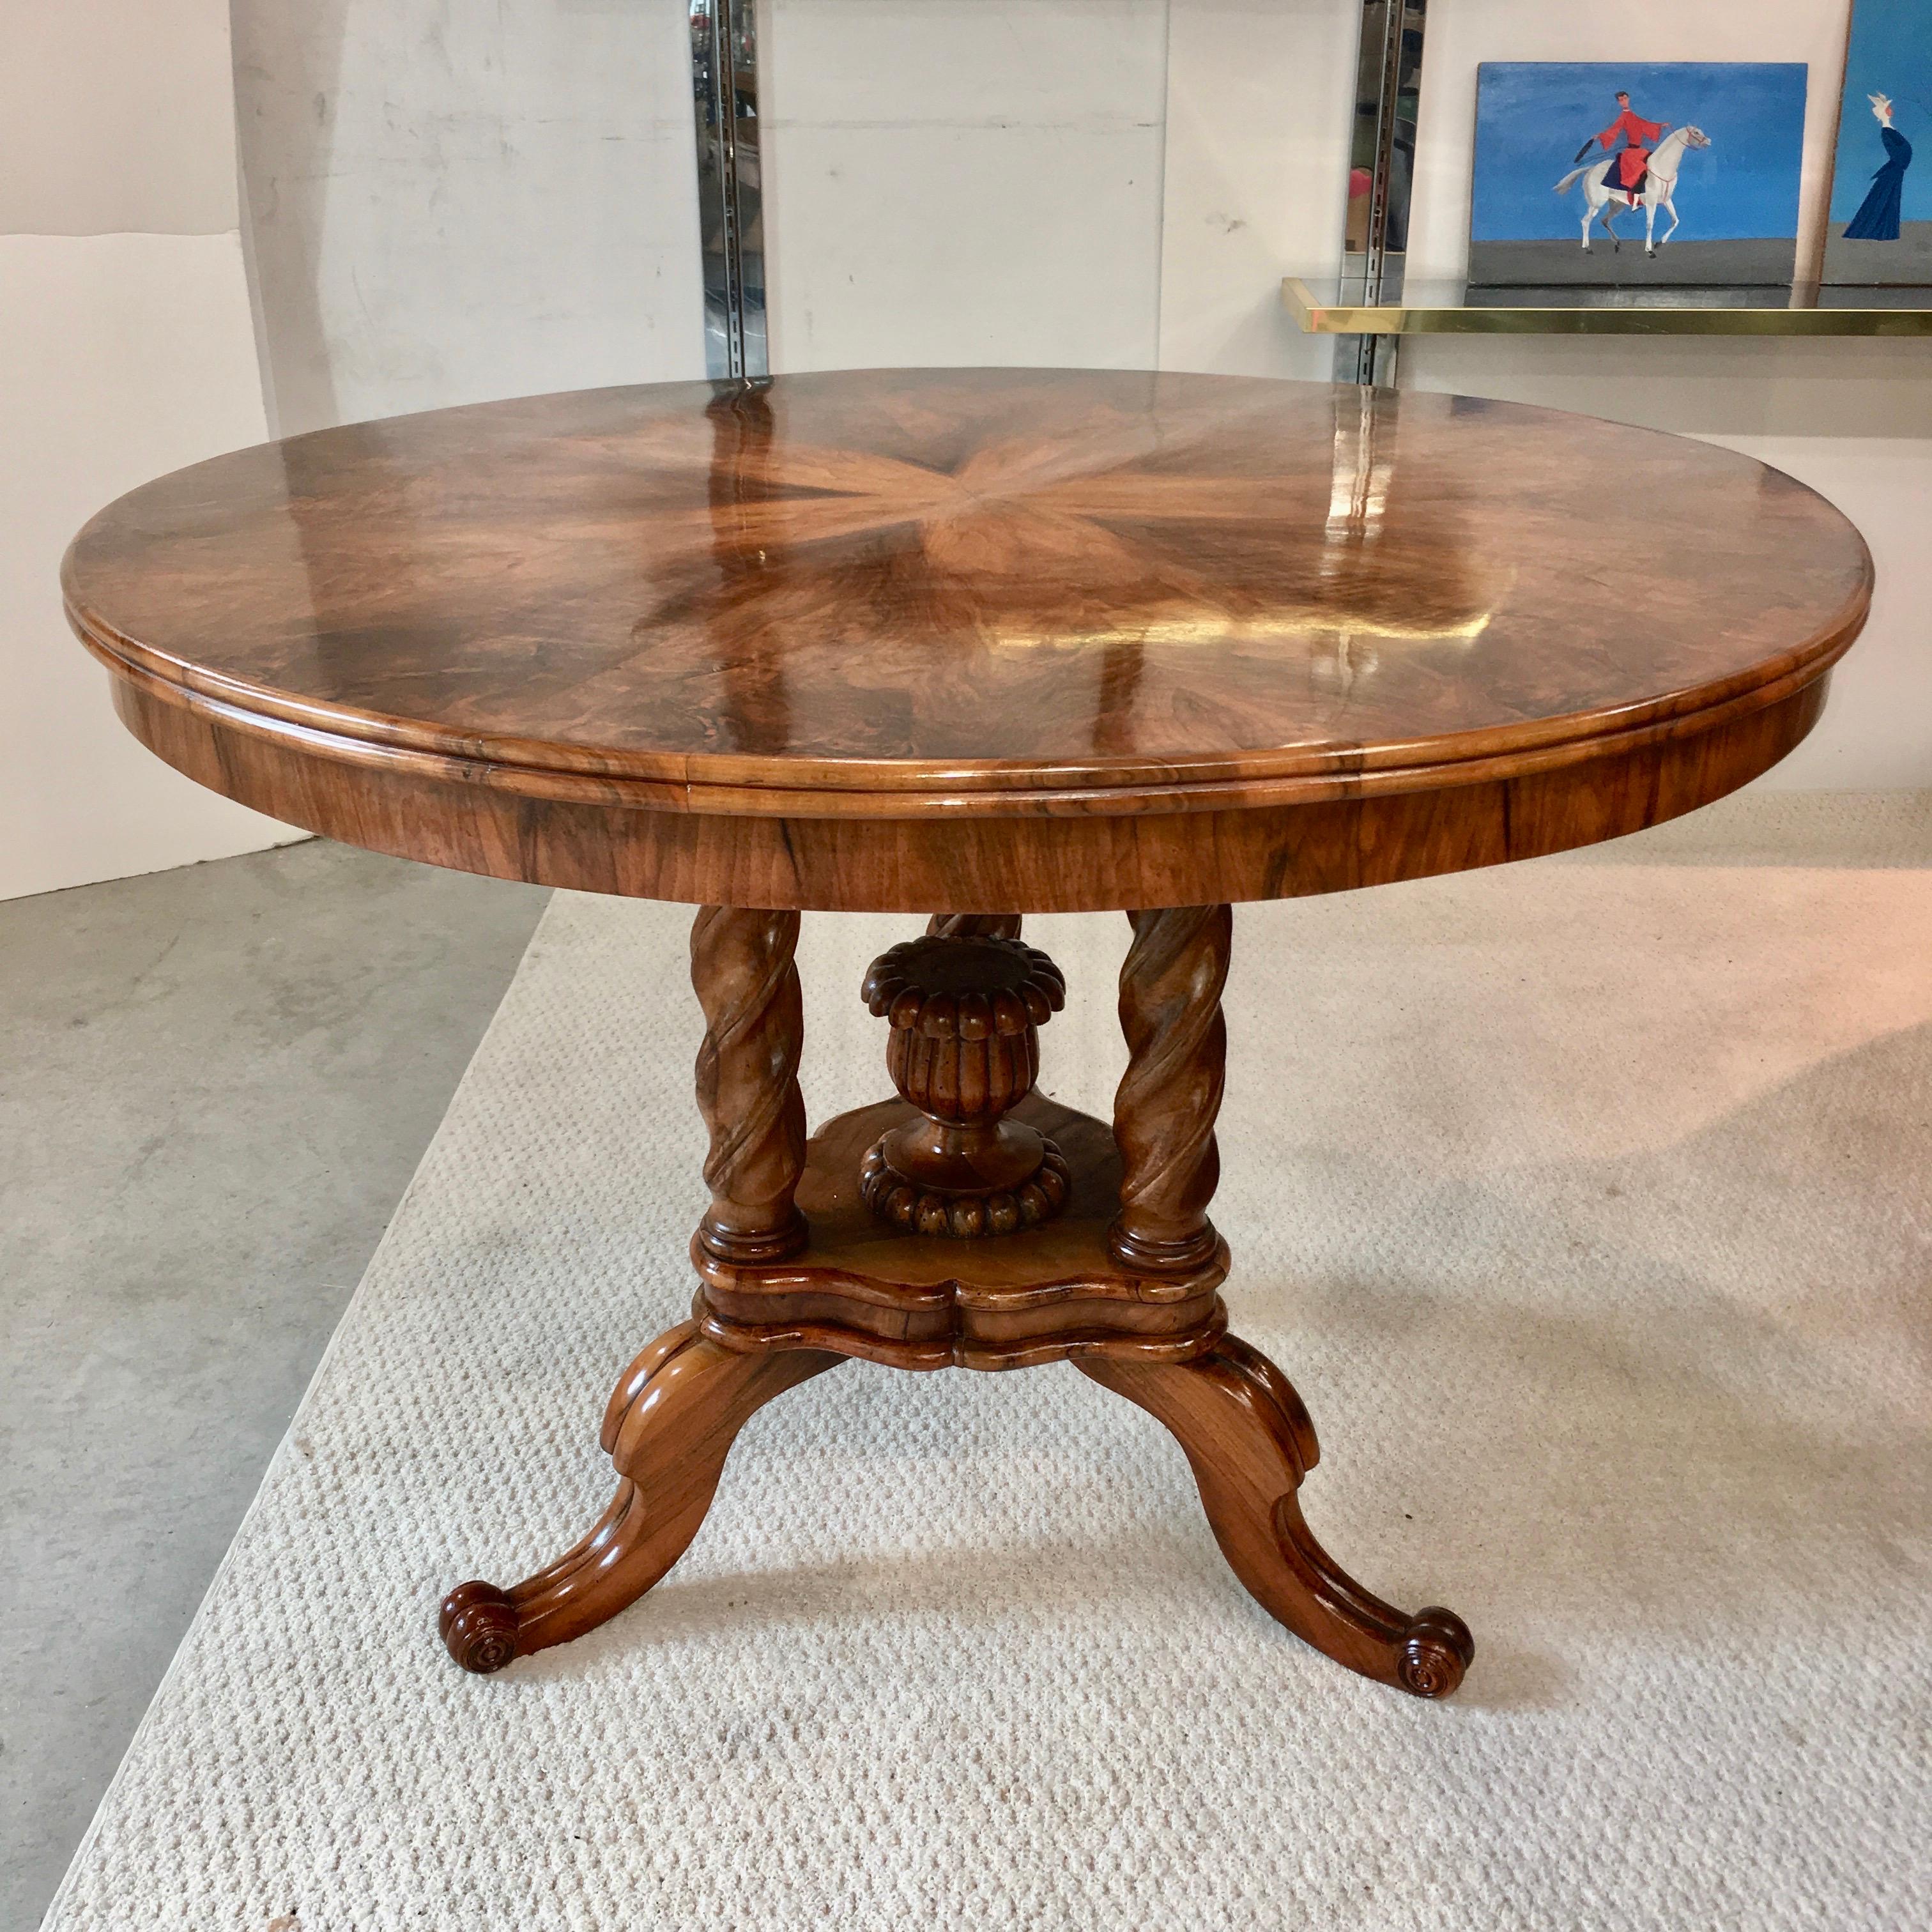 Biedermeier pie figured walnut veneer center table with reed moulded edge on twist turned legs on a moulded plinth base with fluted vase finial on scrolled legs. Beautifully restored. Ready to place.